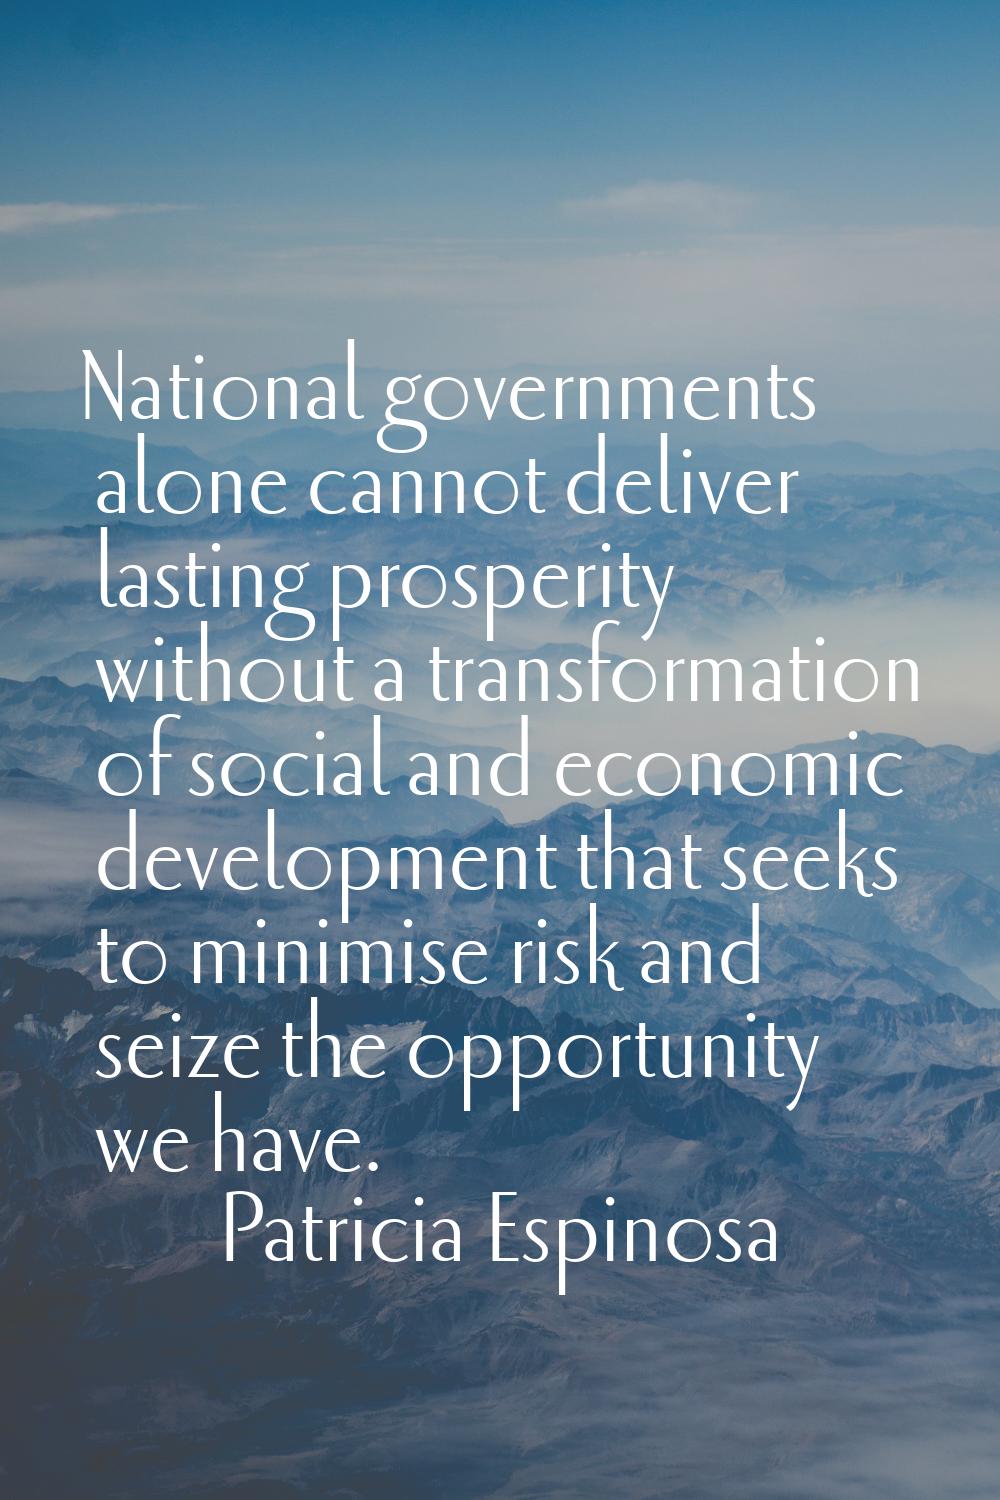 National governments alone cannot deliver lasting prosperity without a transformation of social and